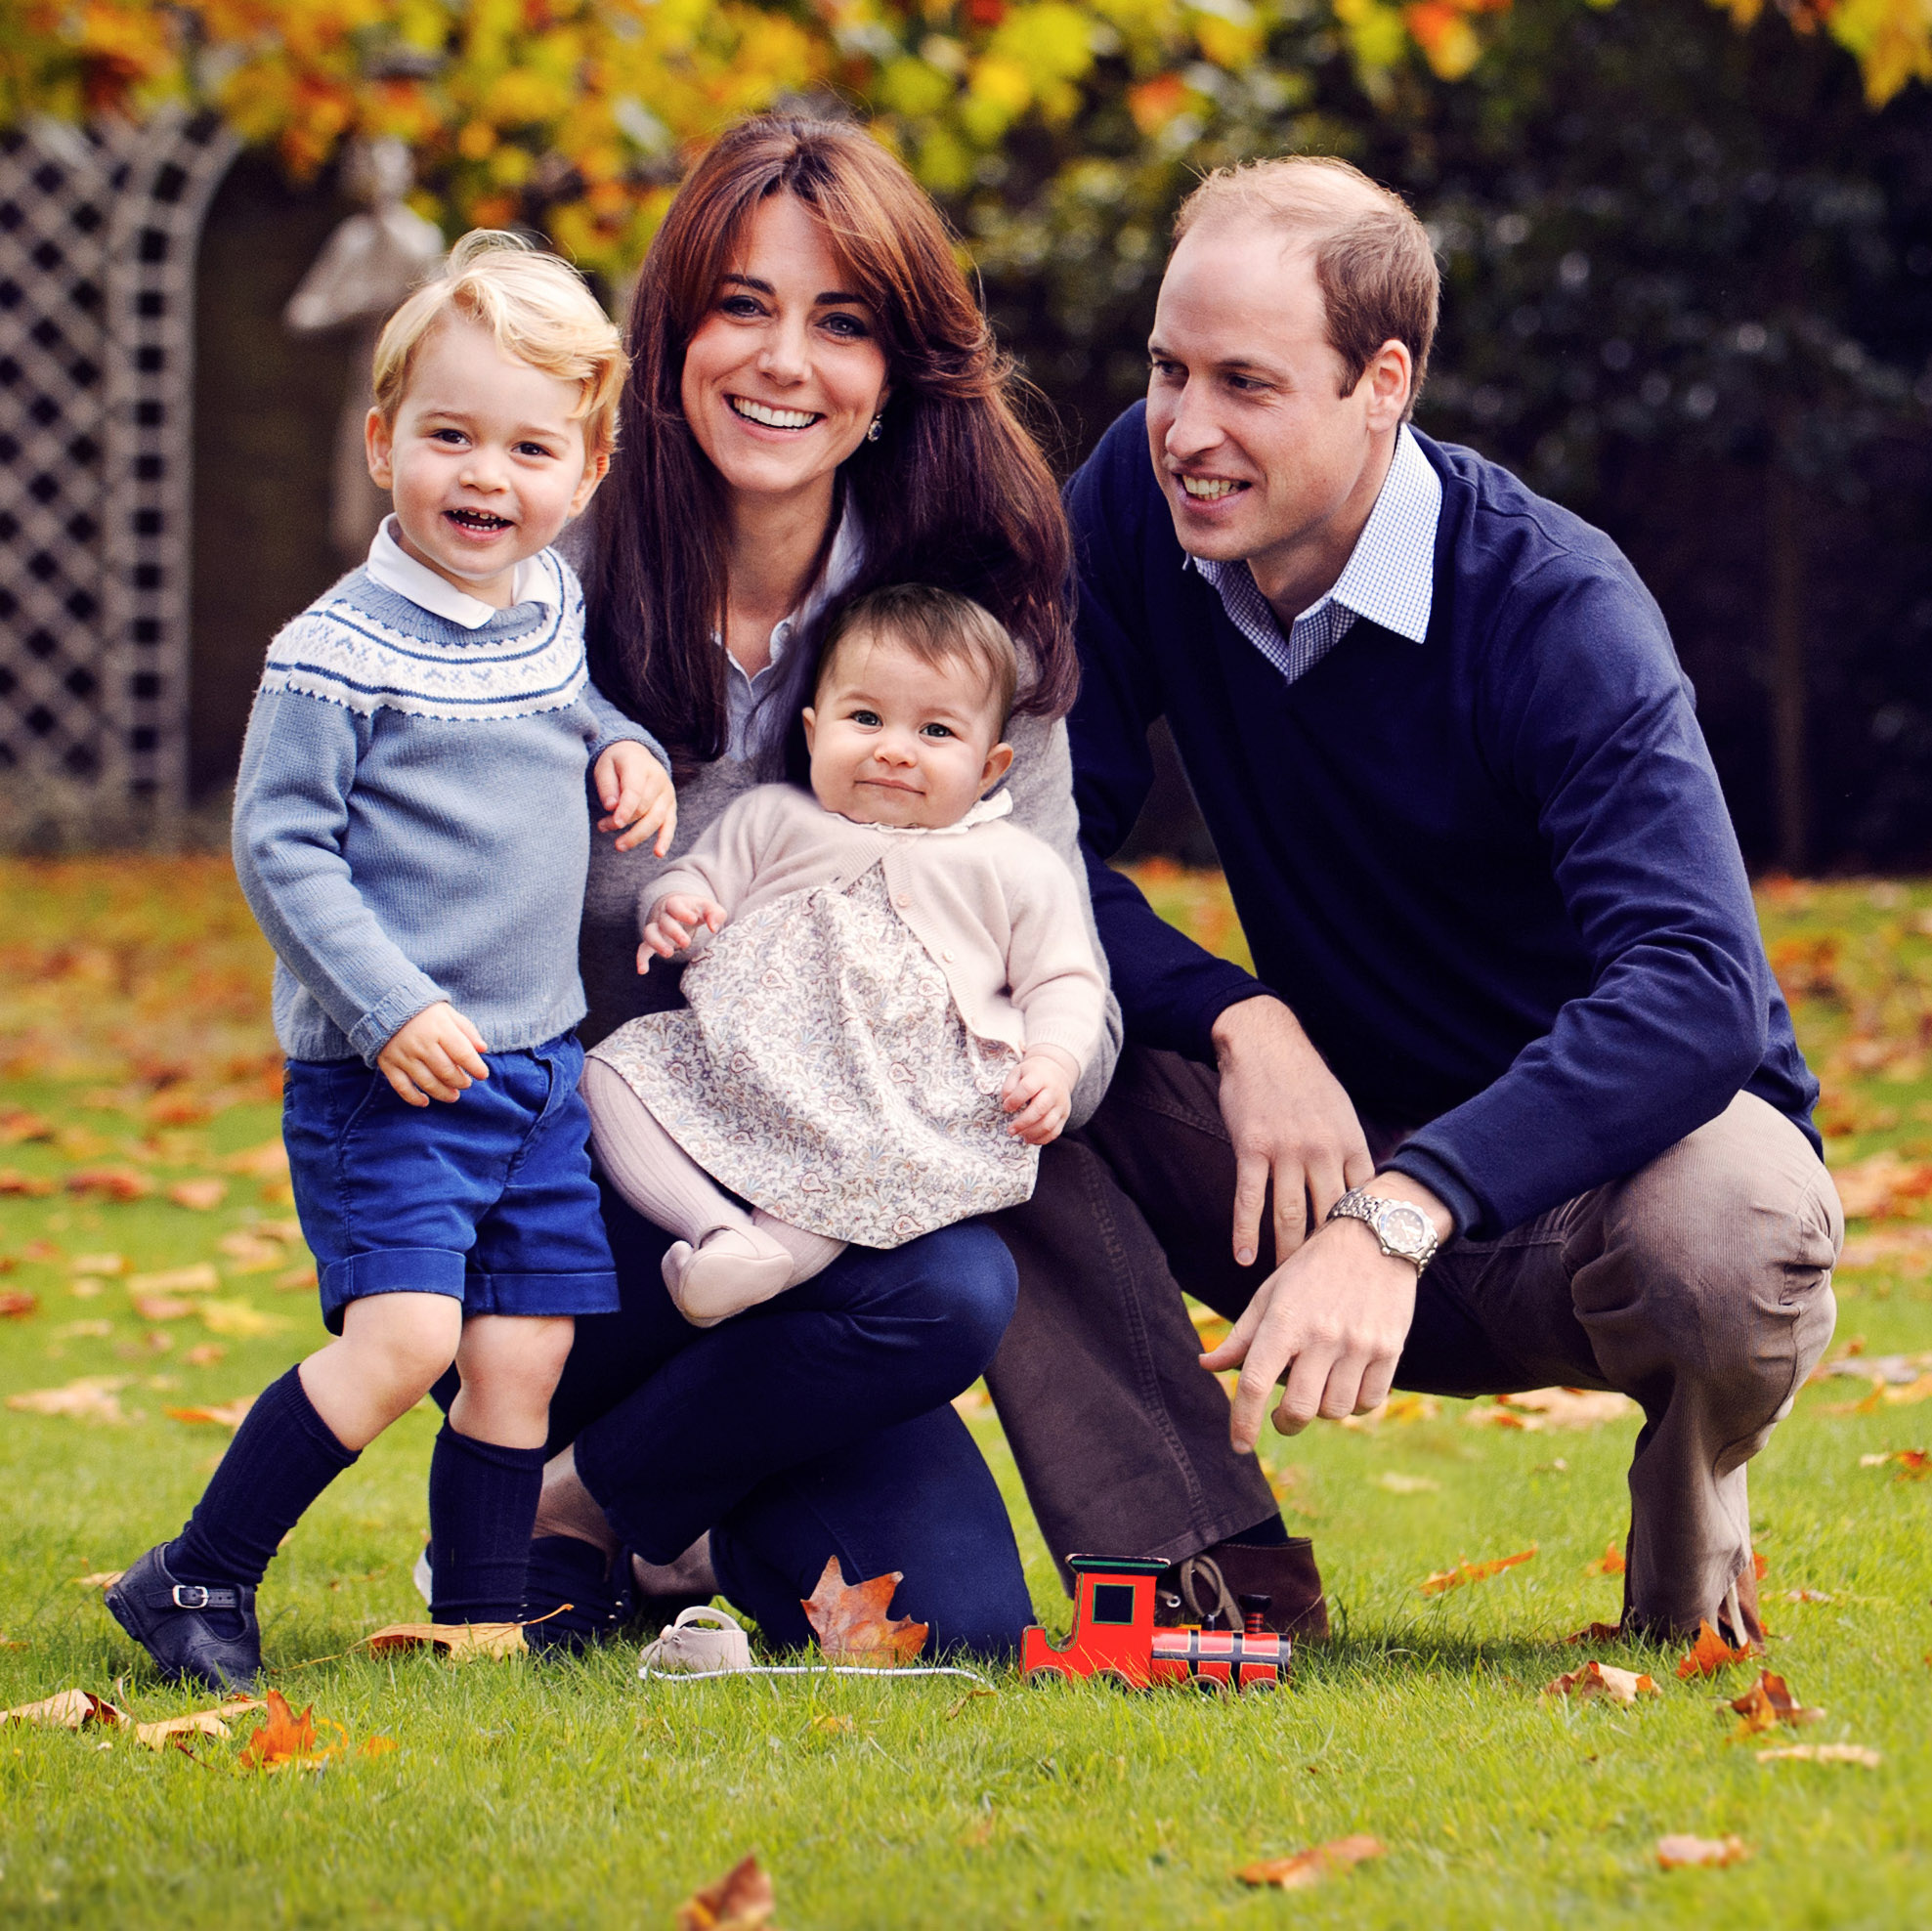 Kate Middleton and Prince William "Want at Least 3 Kids Close in Age" - Closer